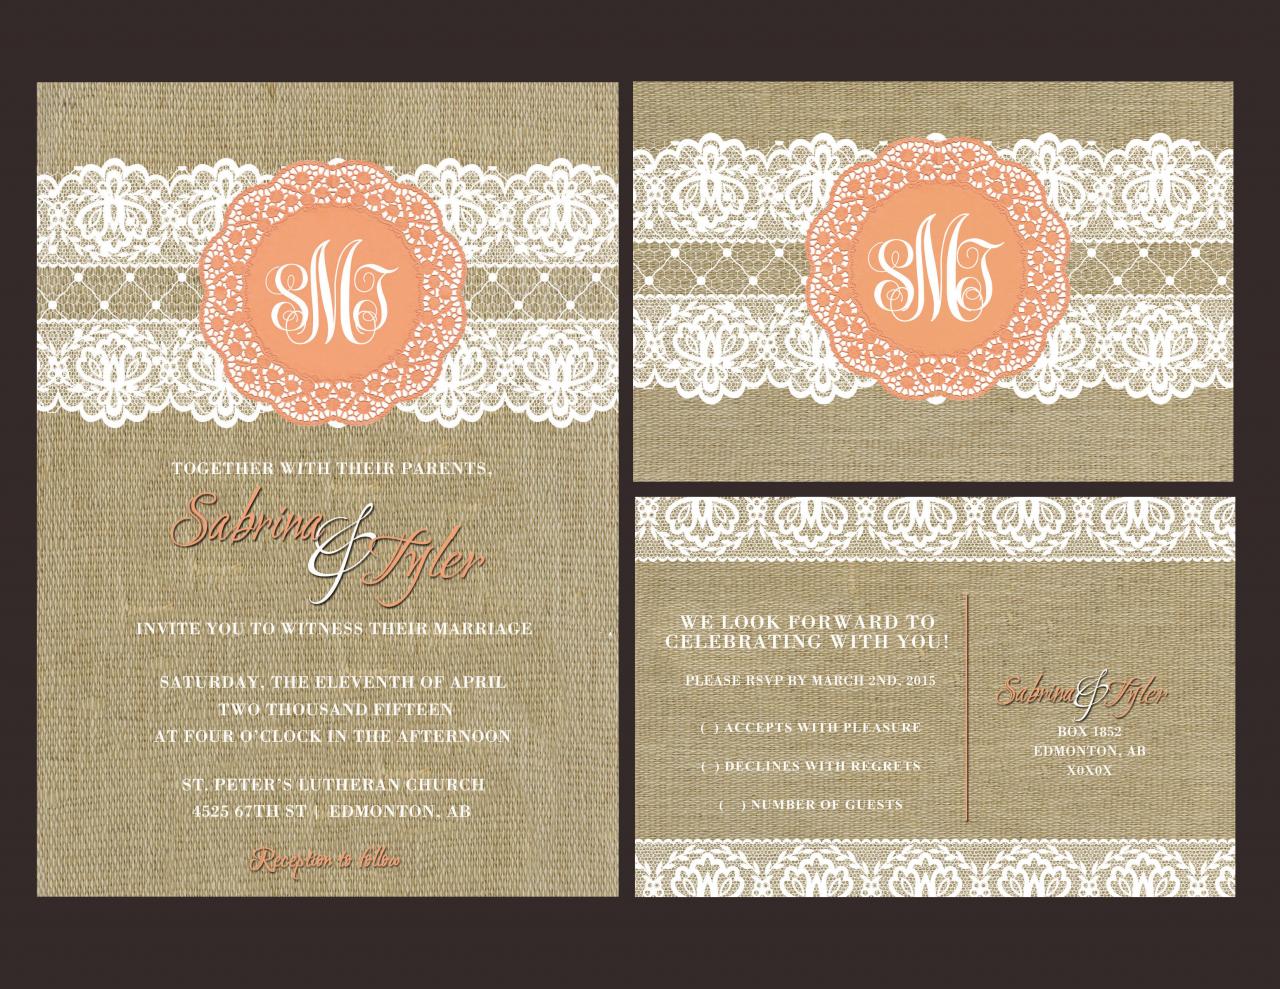 100 Sets Personalized Wedding Invitations /fully Customized To Your Wedding